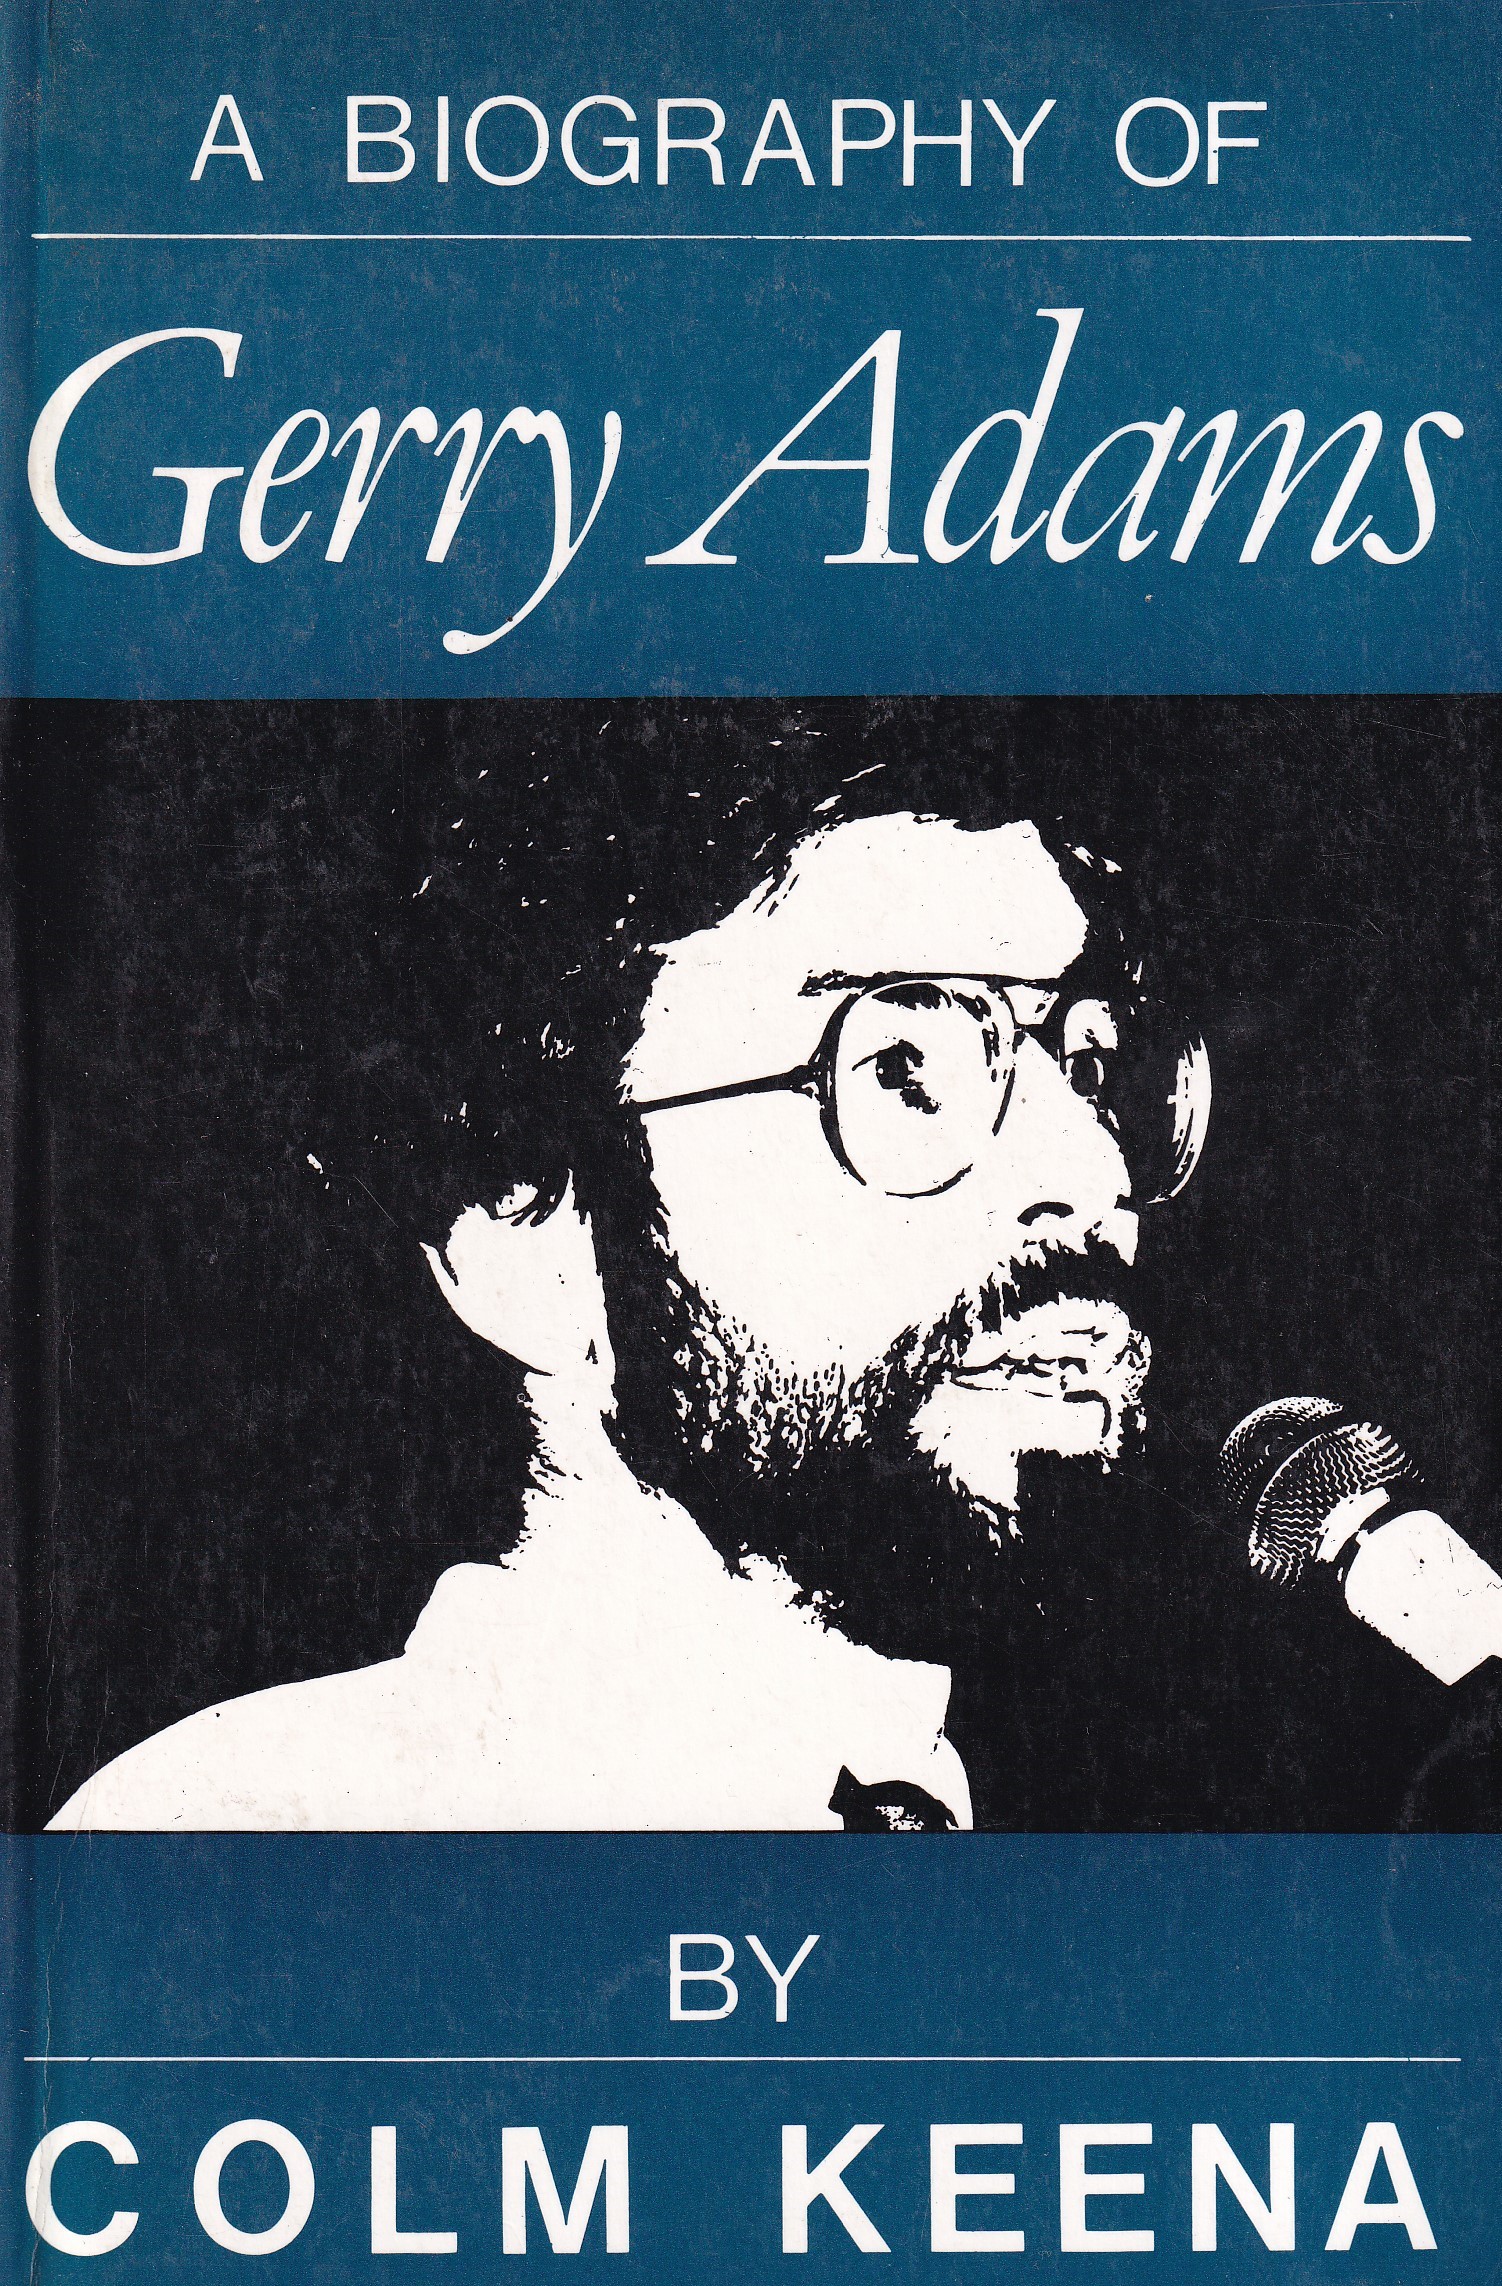 A Biography of Gerry Adams by Colm Keena